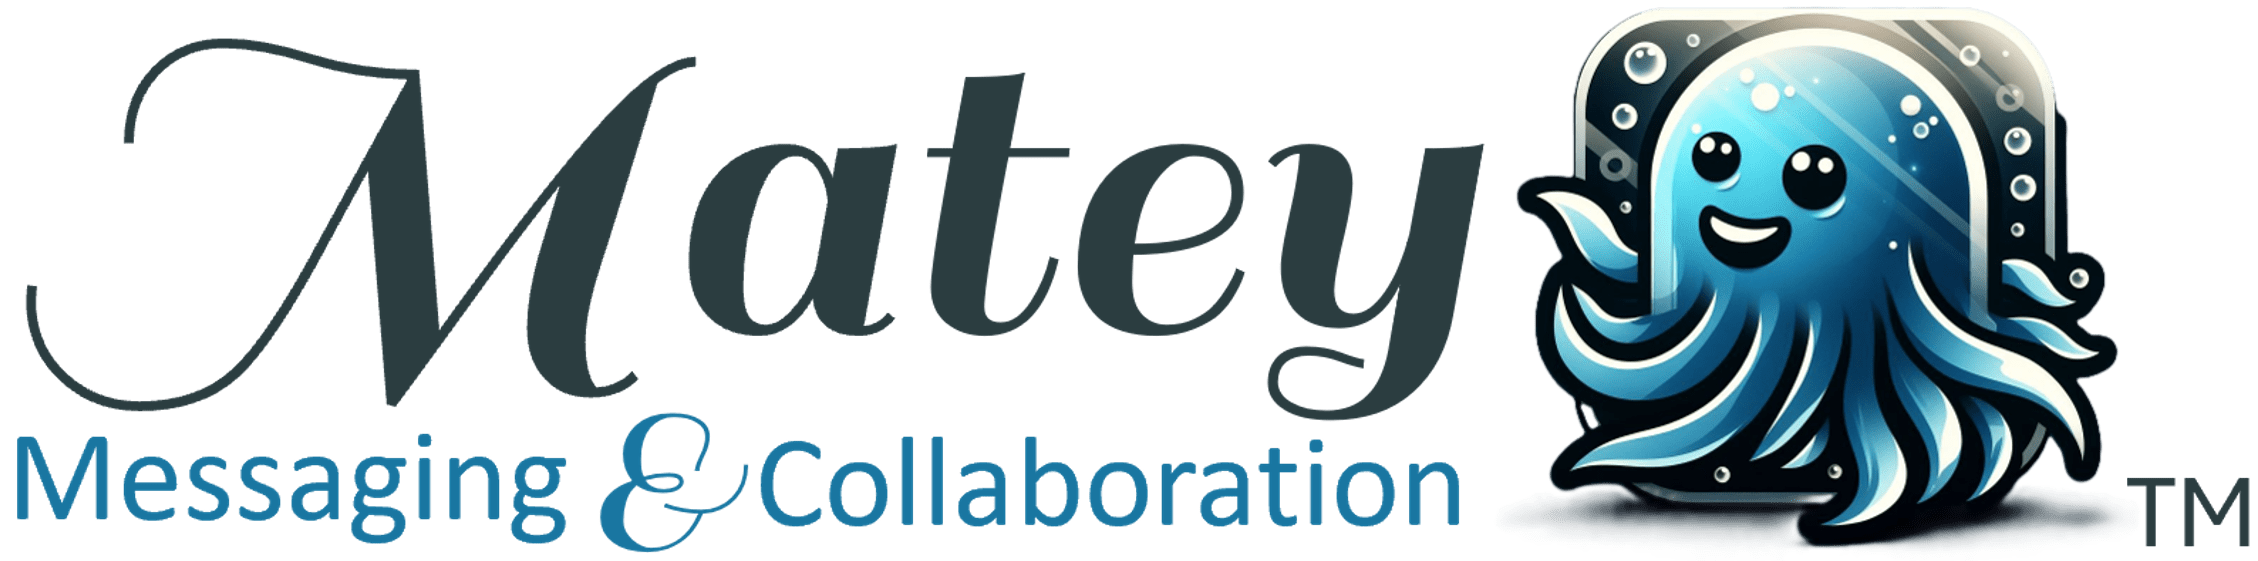 Logo of Matey™ - Messaging & Collaboration, a Jadex Strategic Group service powered by Microsoft Teams, featuring a friendly octopus mascot